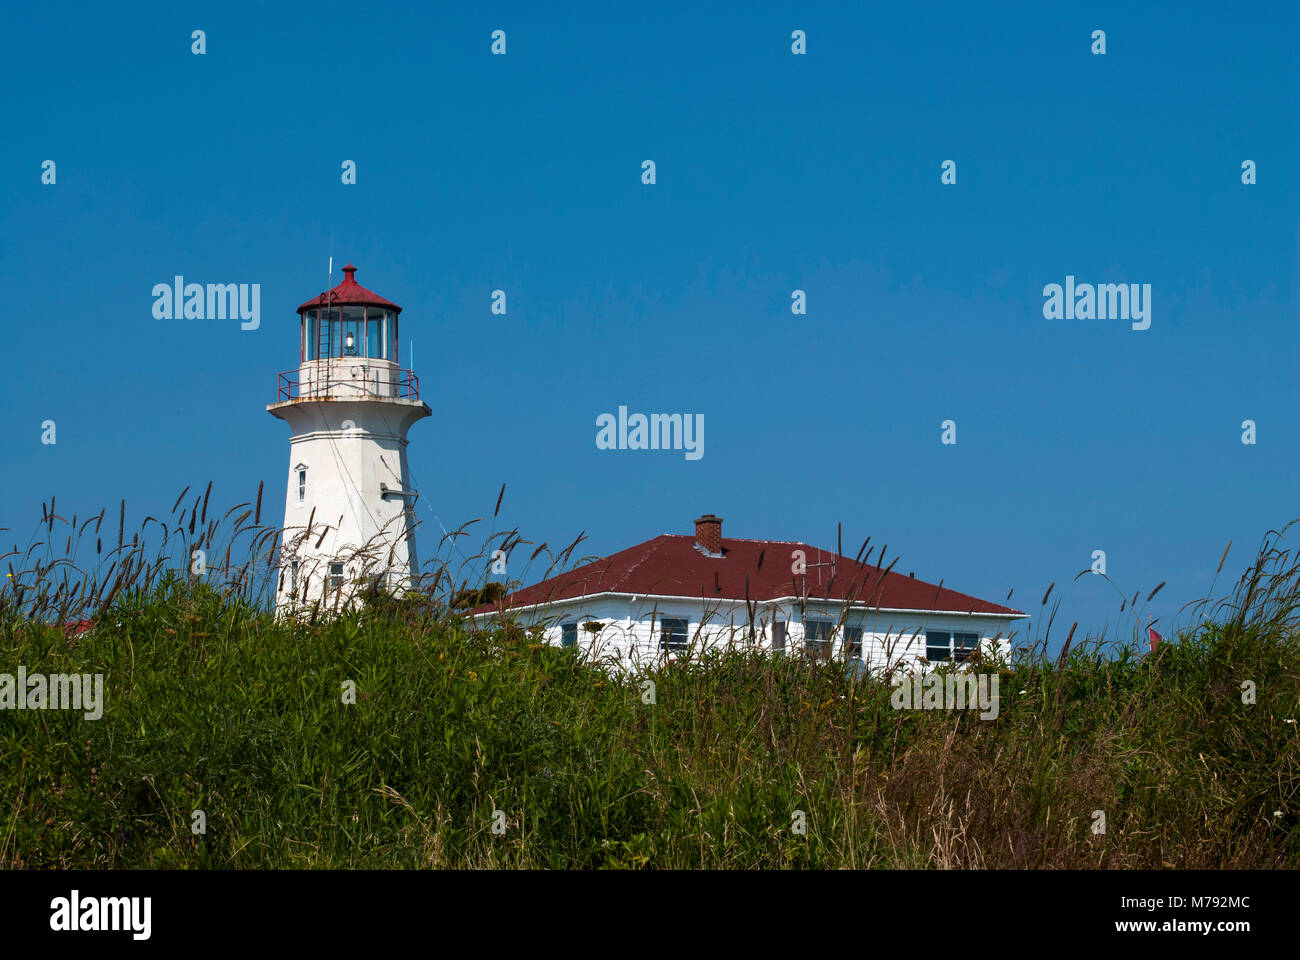 Weathered Machias Seal Island lighthouse on a warm summer day surrounded by vegetation. It is not automated and is manned by Canadian keepers. Stock Photo